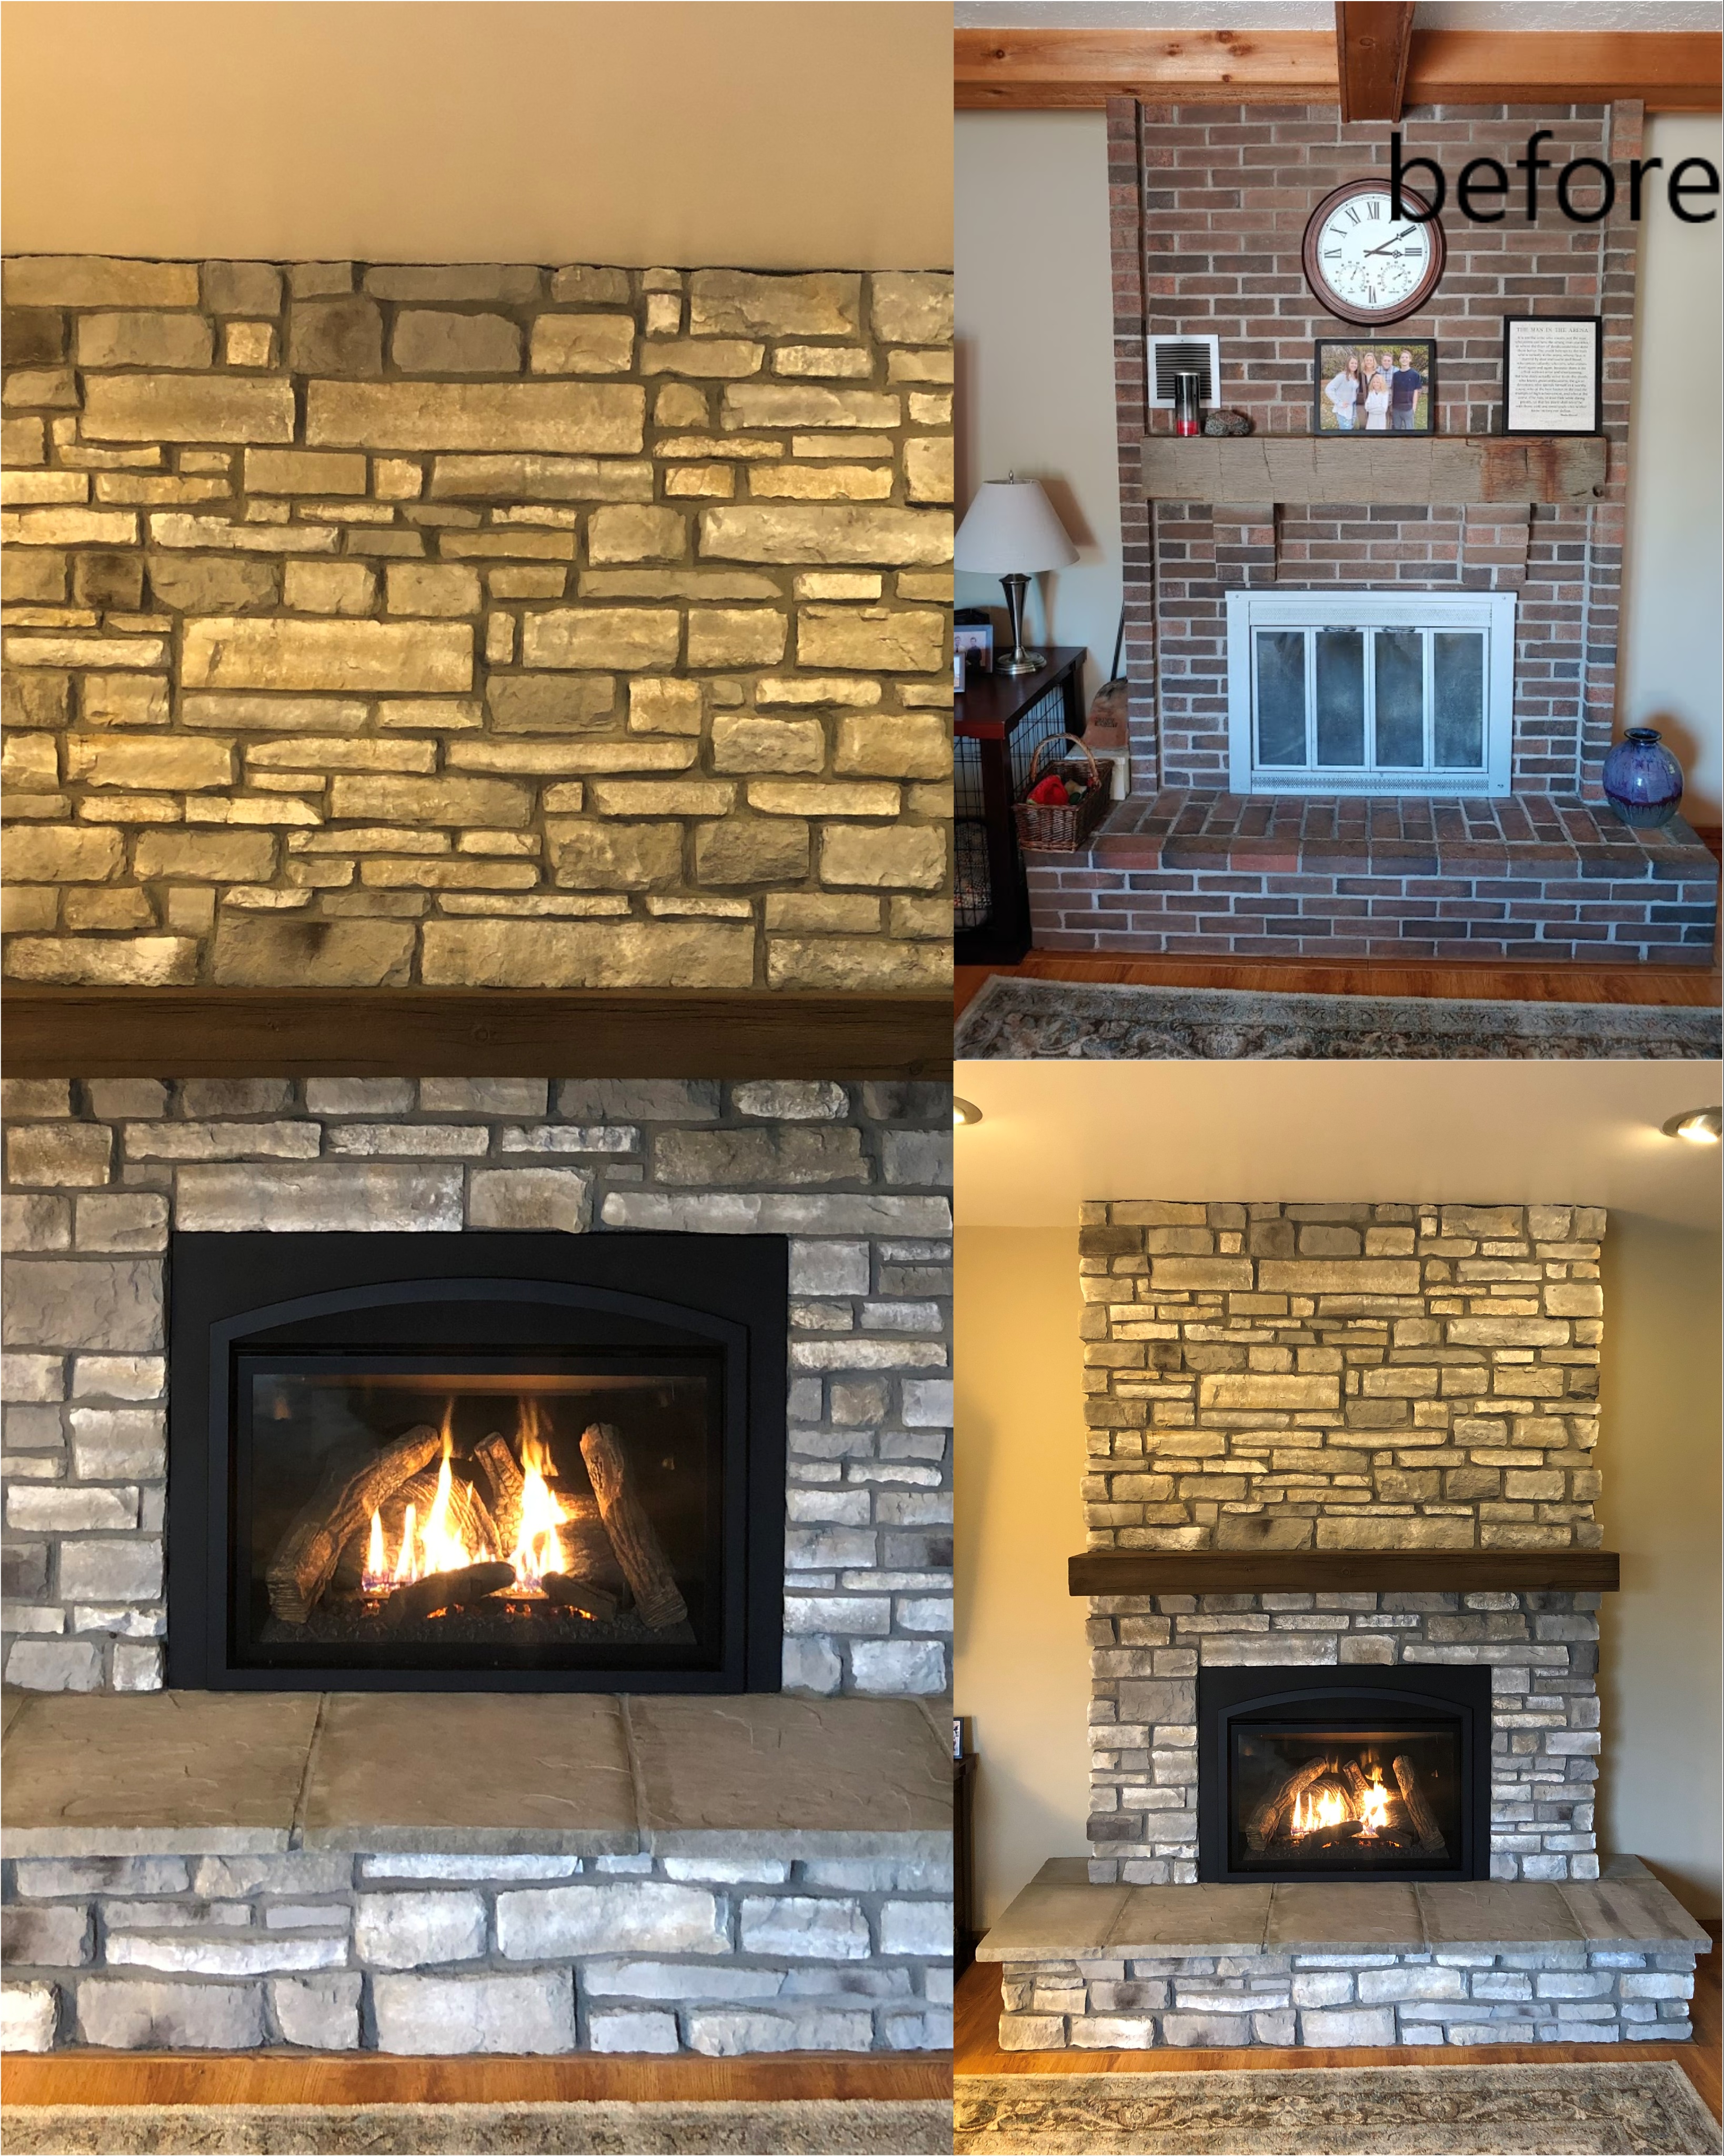 Image of a Chaska 34 by Kozy Heat Fireplace featuring rustic Cultured Stonework and MagraHearth Mantle.